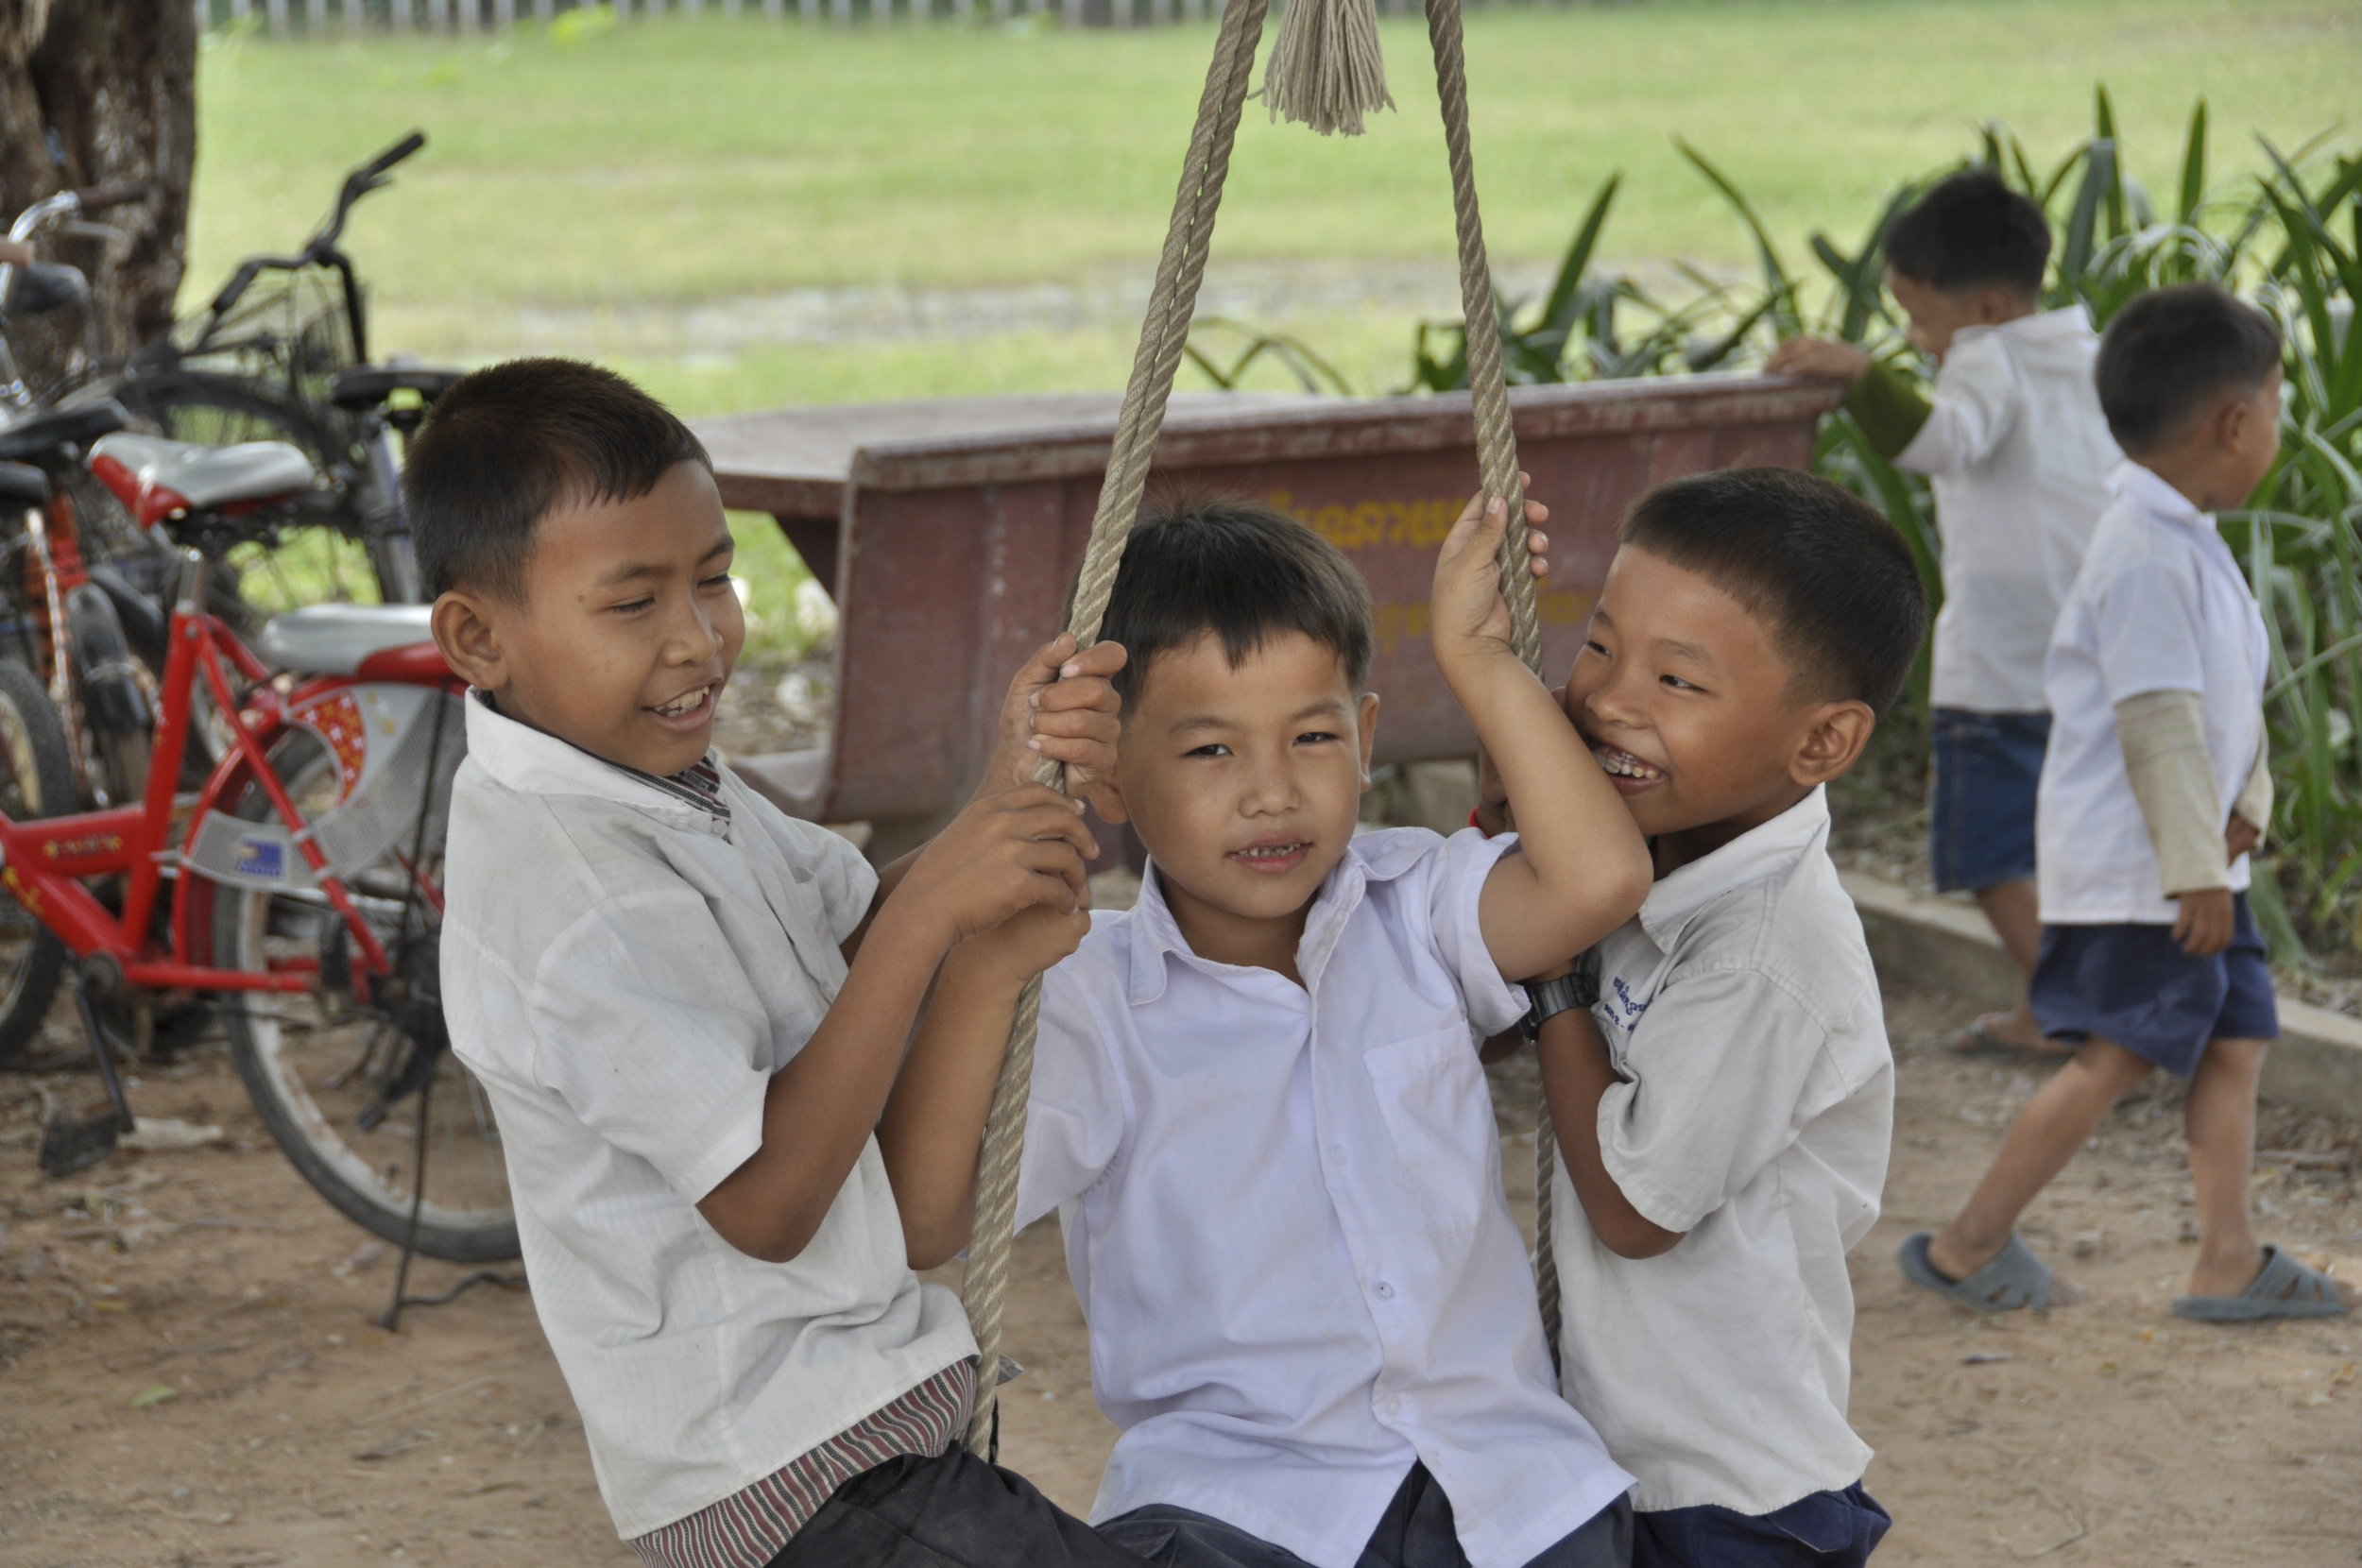 Children at play (Siem Reap, Cambodia)